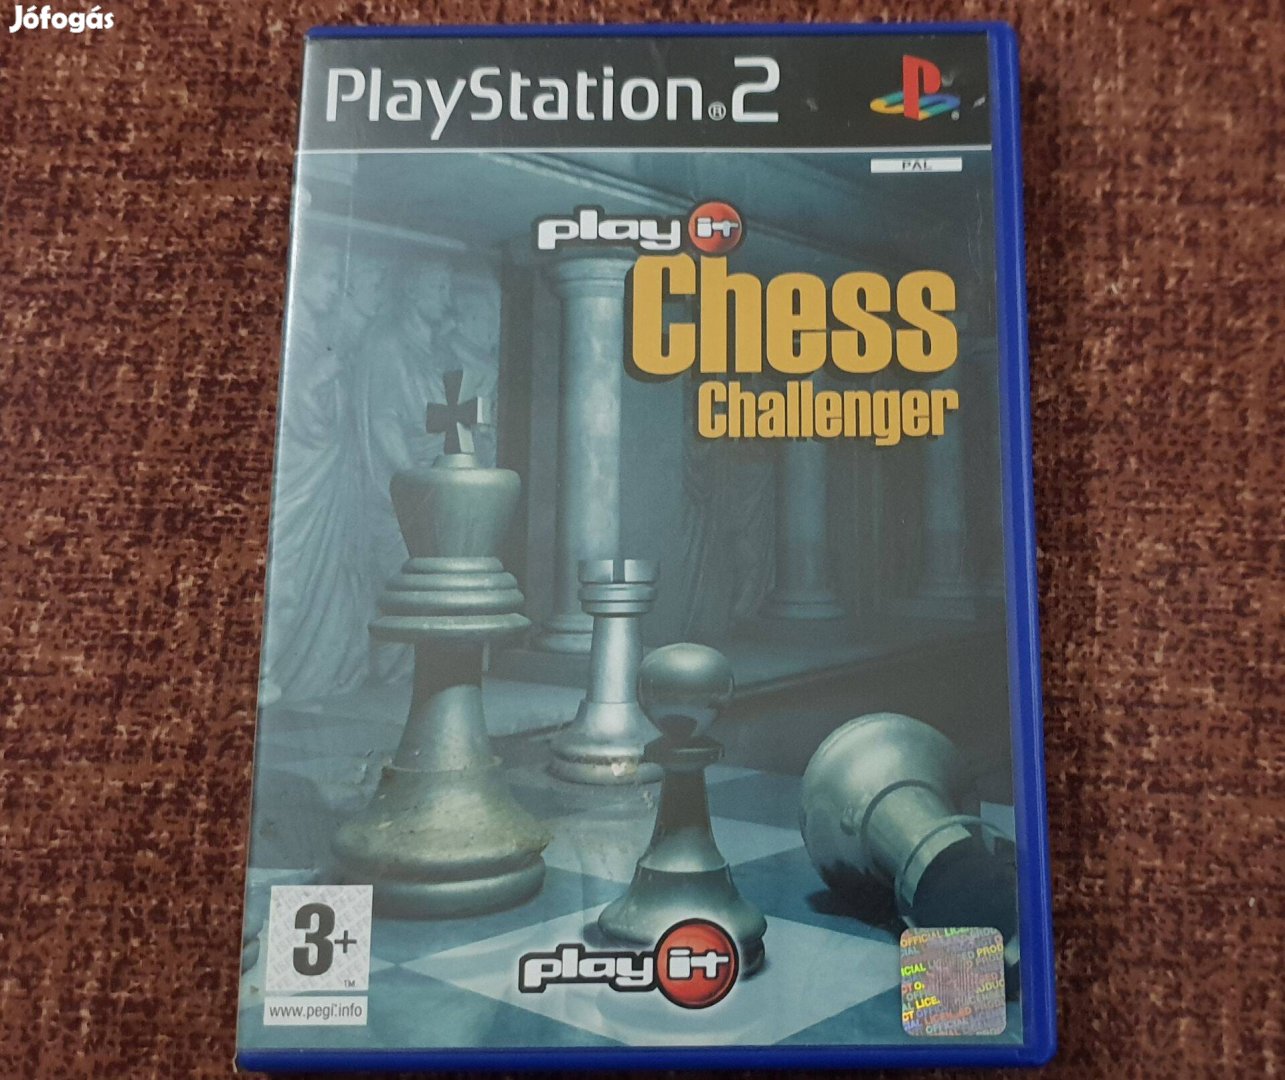 Play it Chess Challeger Playstation 2 eredeti lemez ( 2500 Ft )